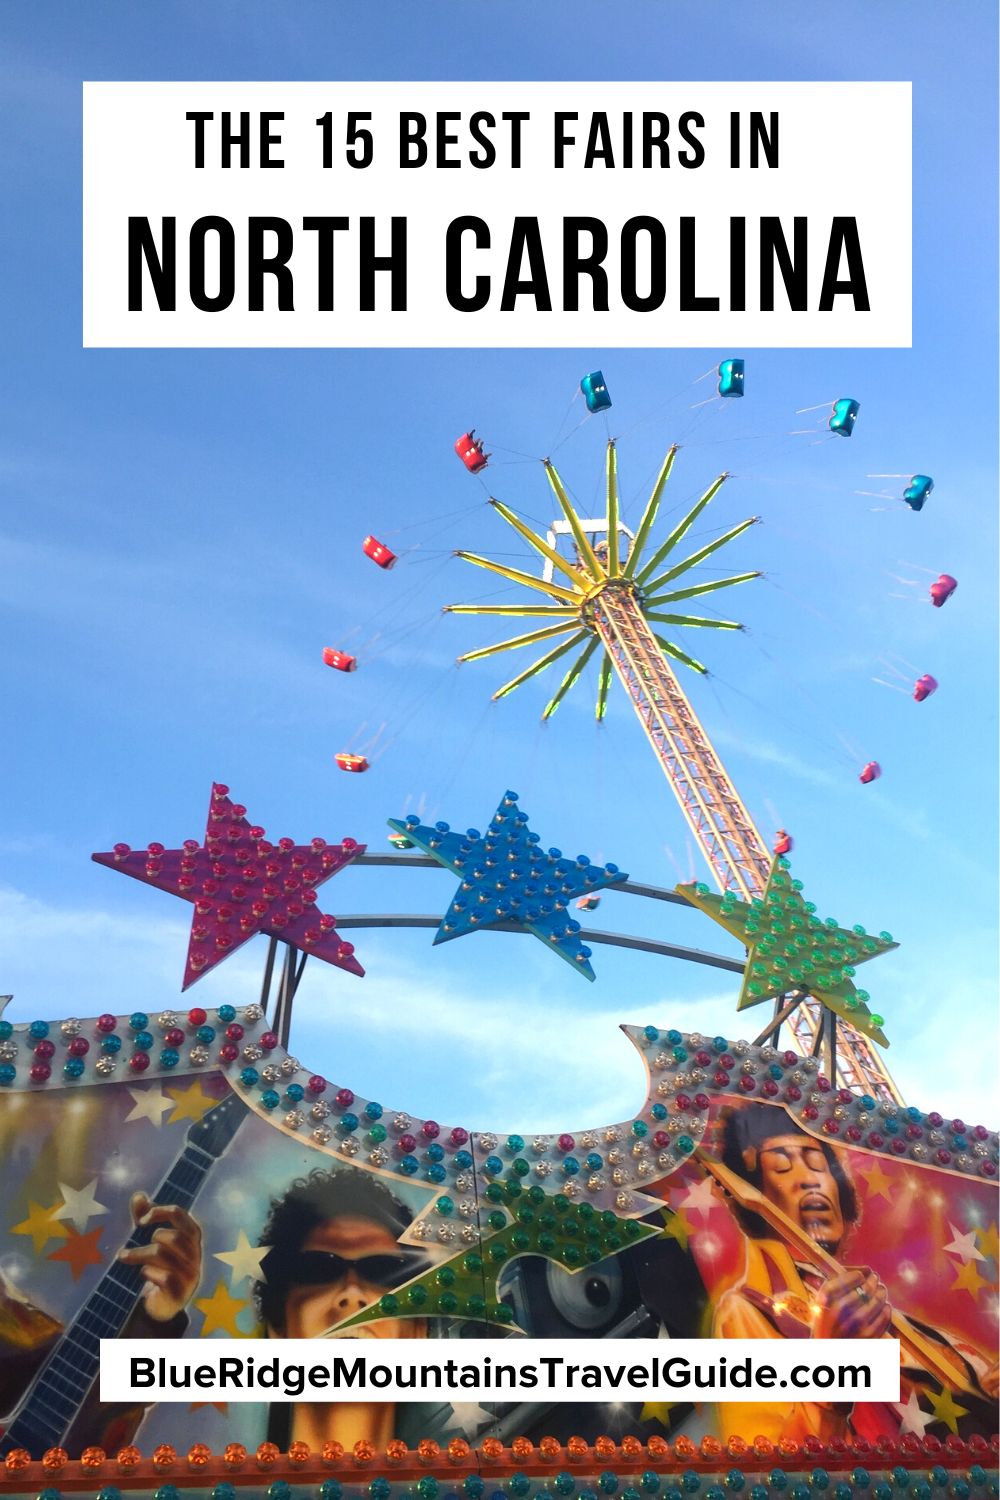 The 15 Best Fairs in North Carolina to Visit